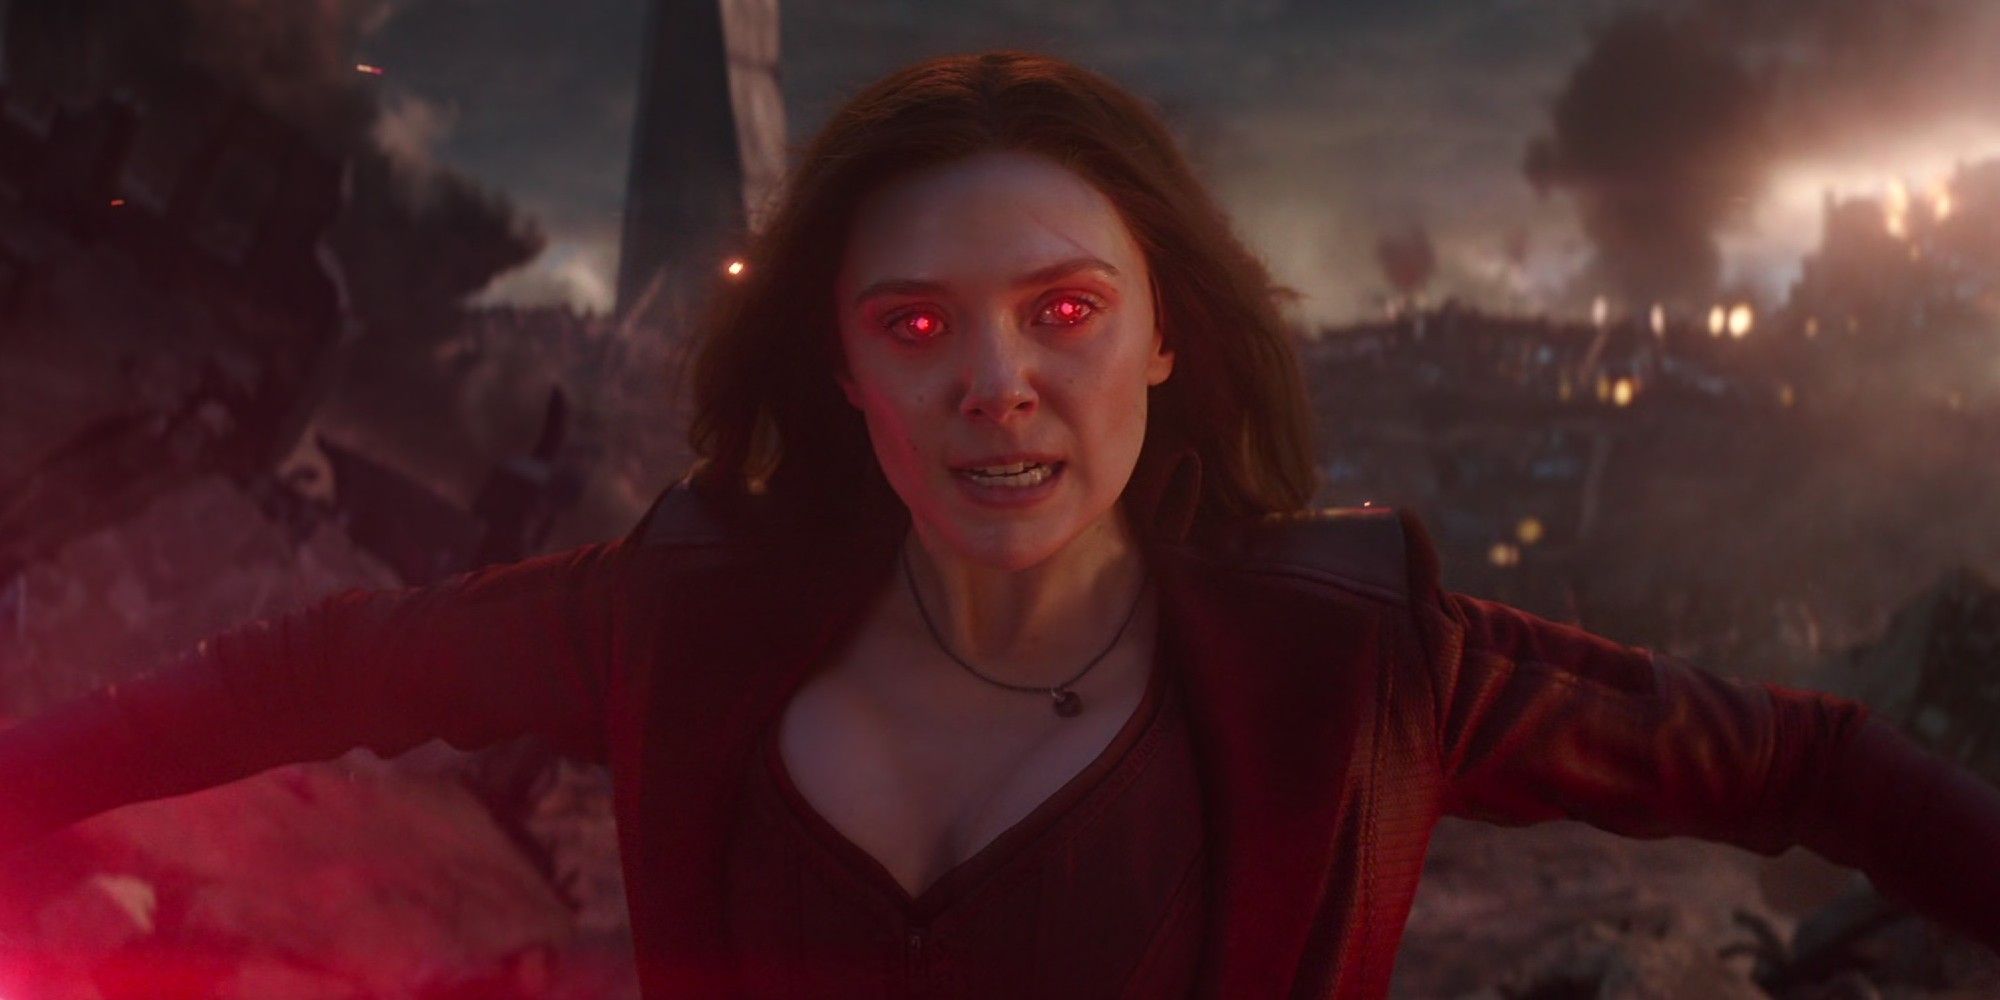 Wanda looks angry and uses her powers against Thanos in Avengers: Endgame